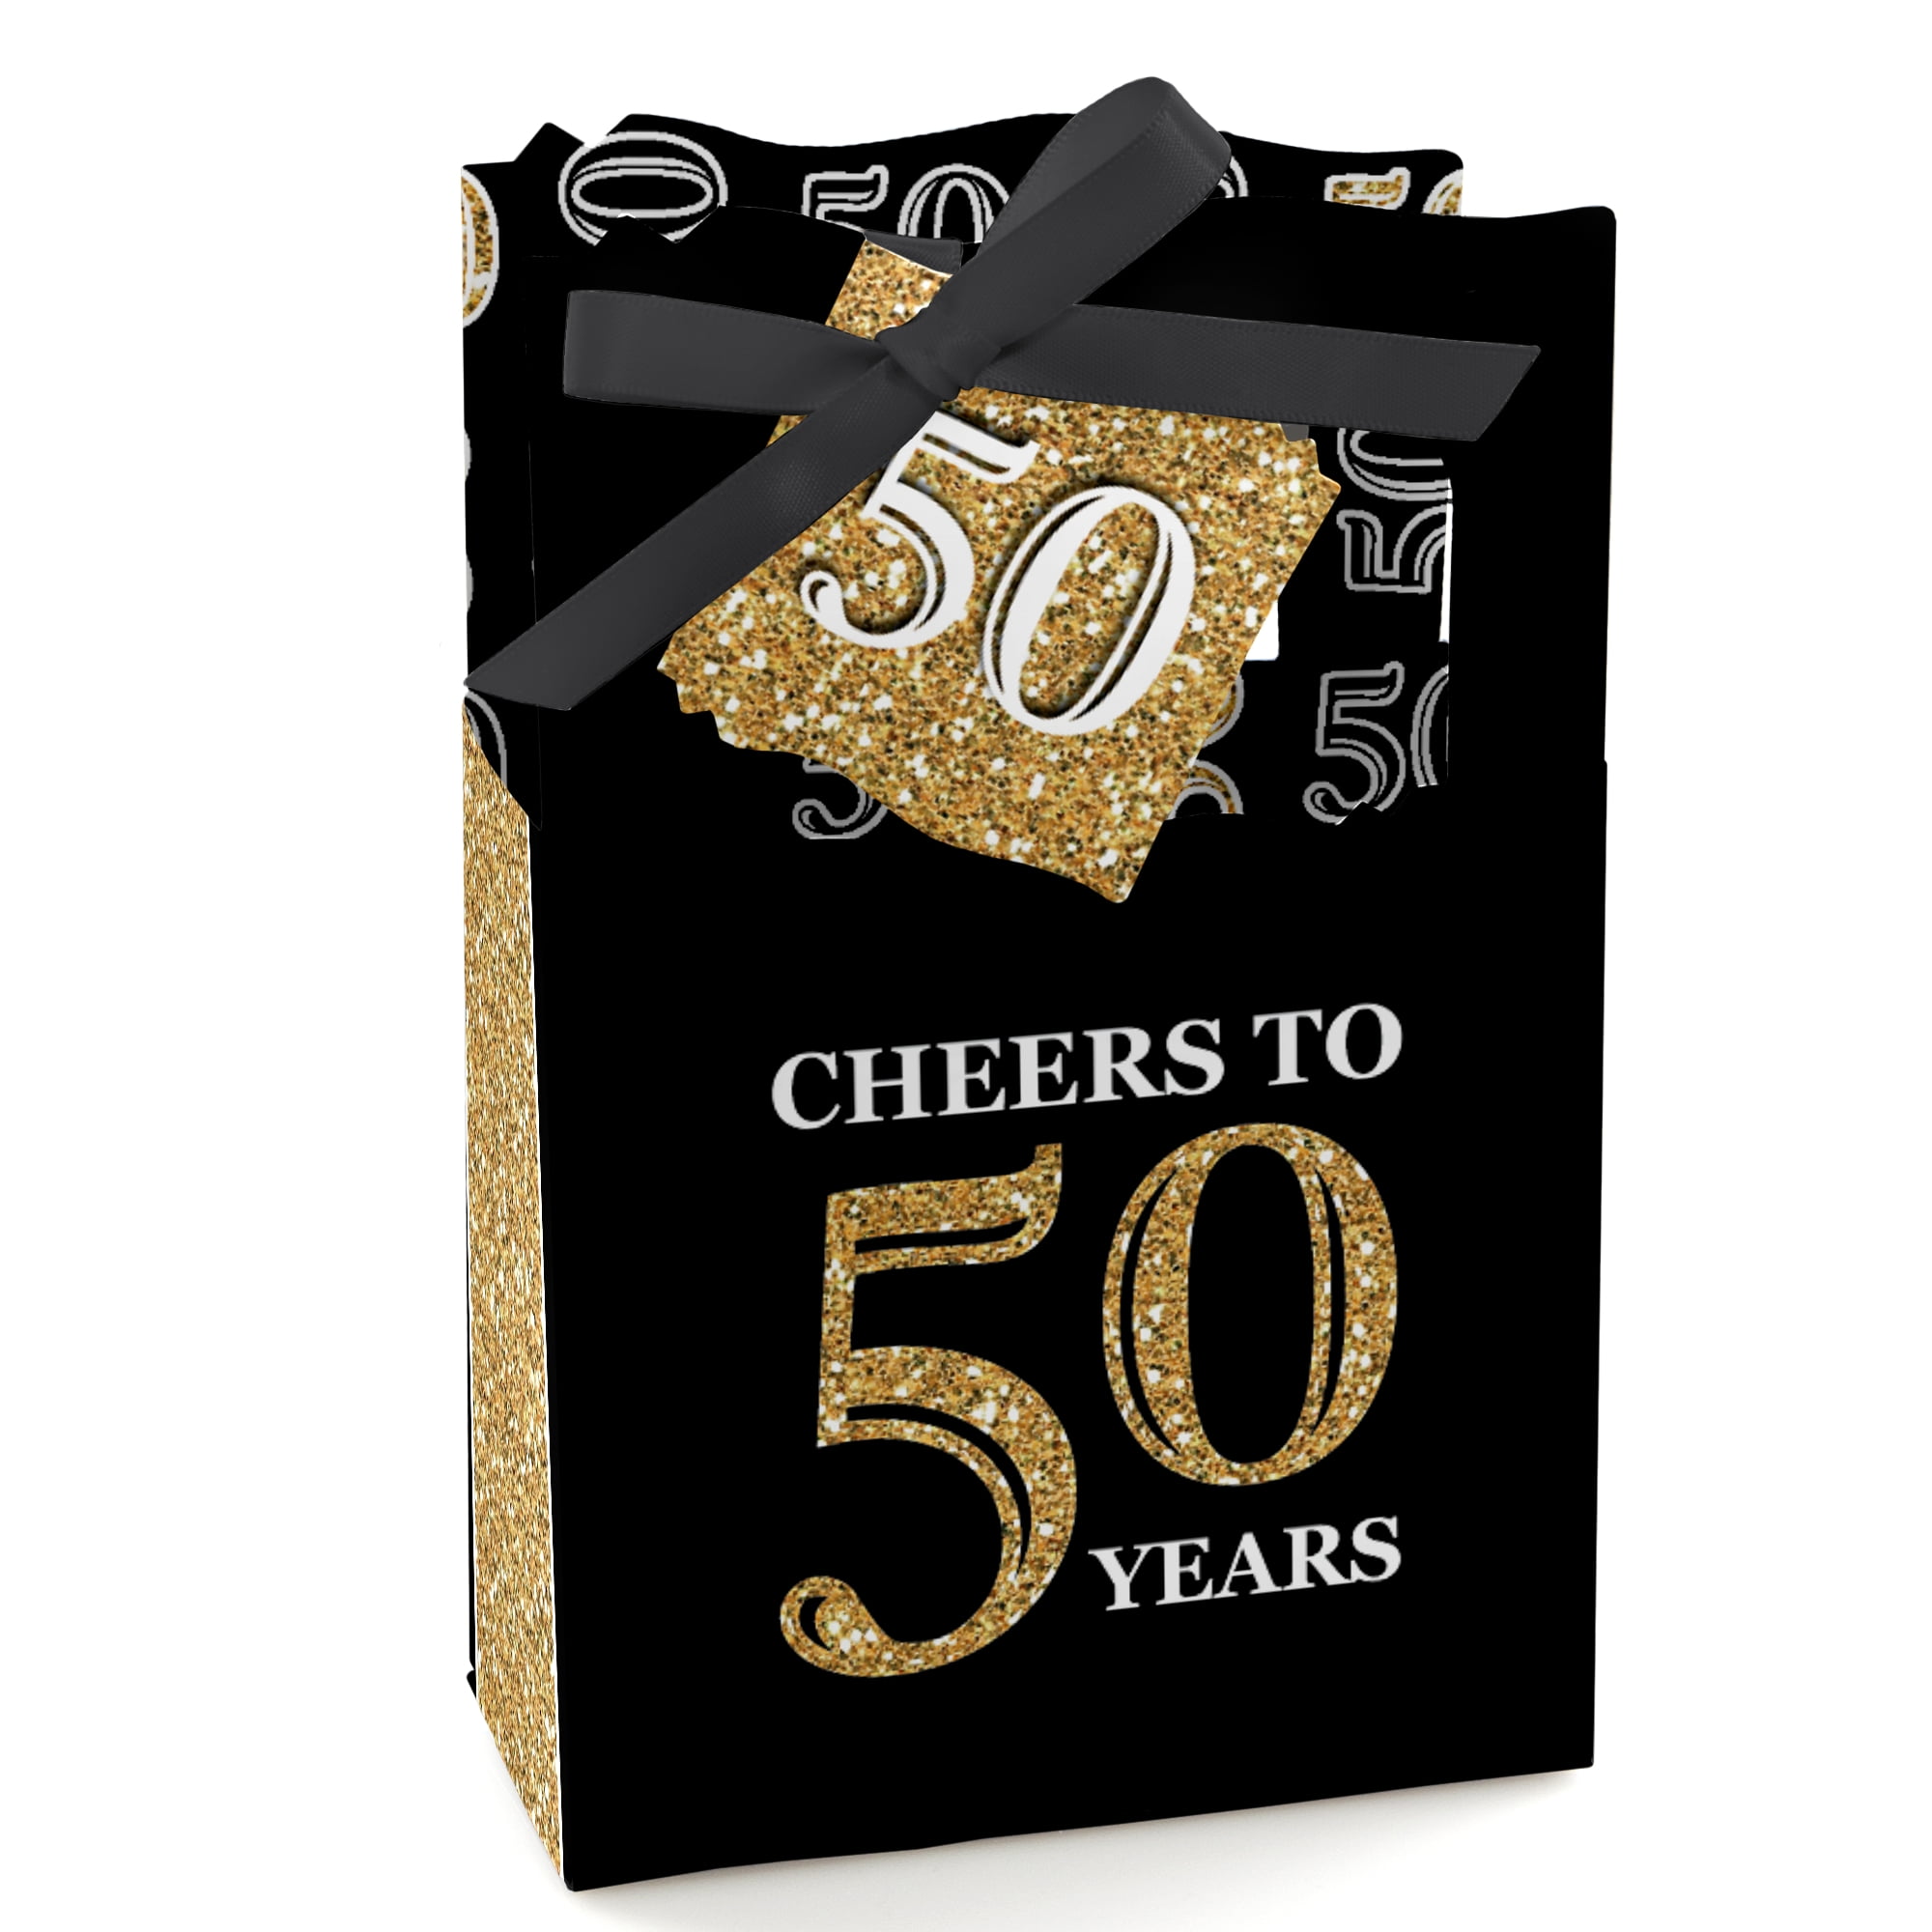 Happy 50th Birthday Gift Box in White with Gold Foil text